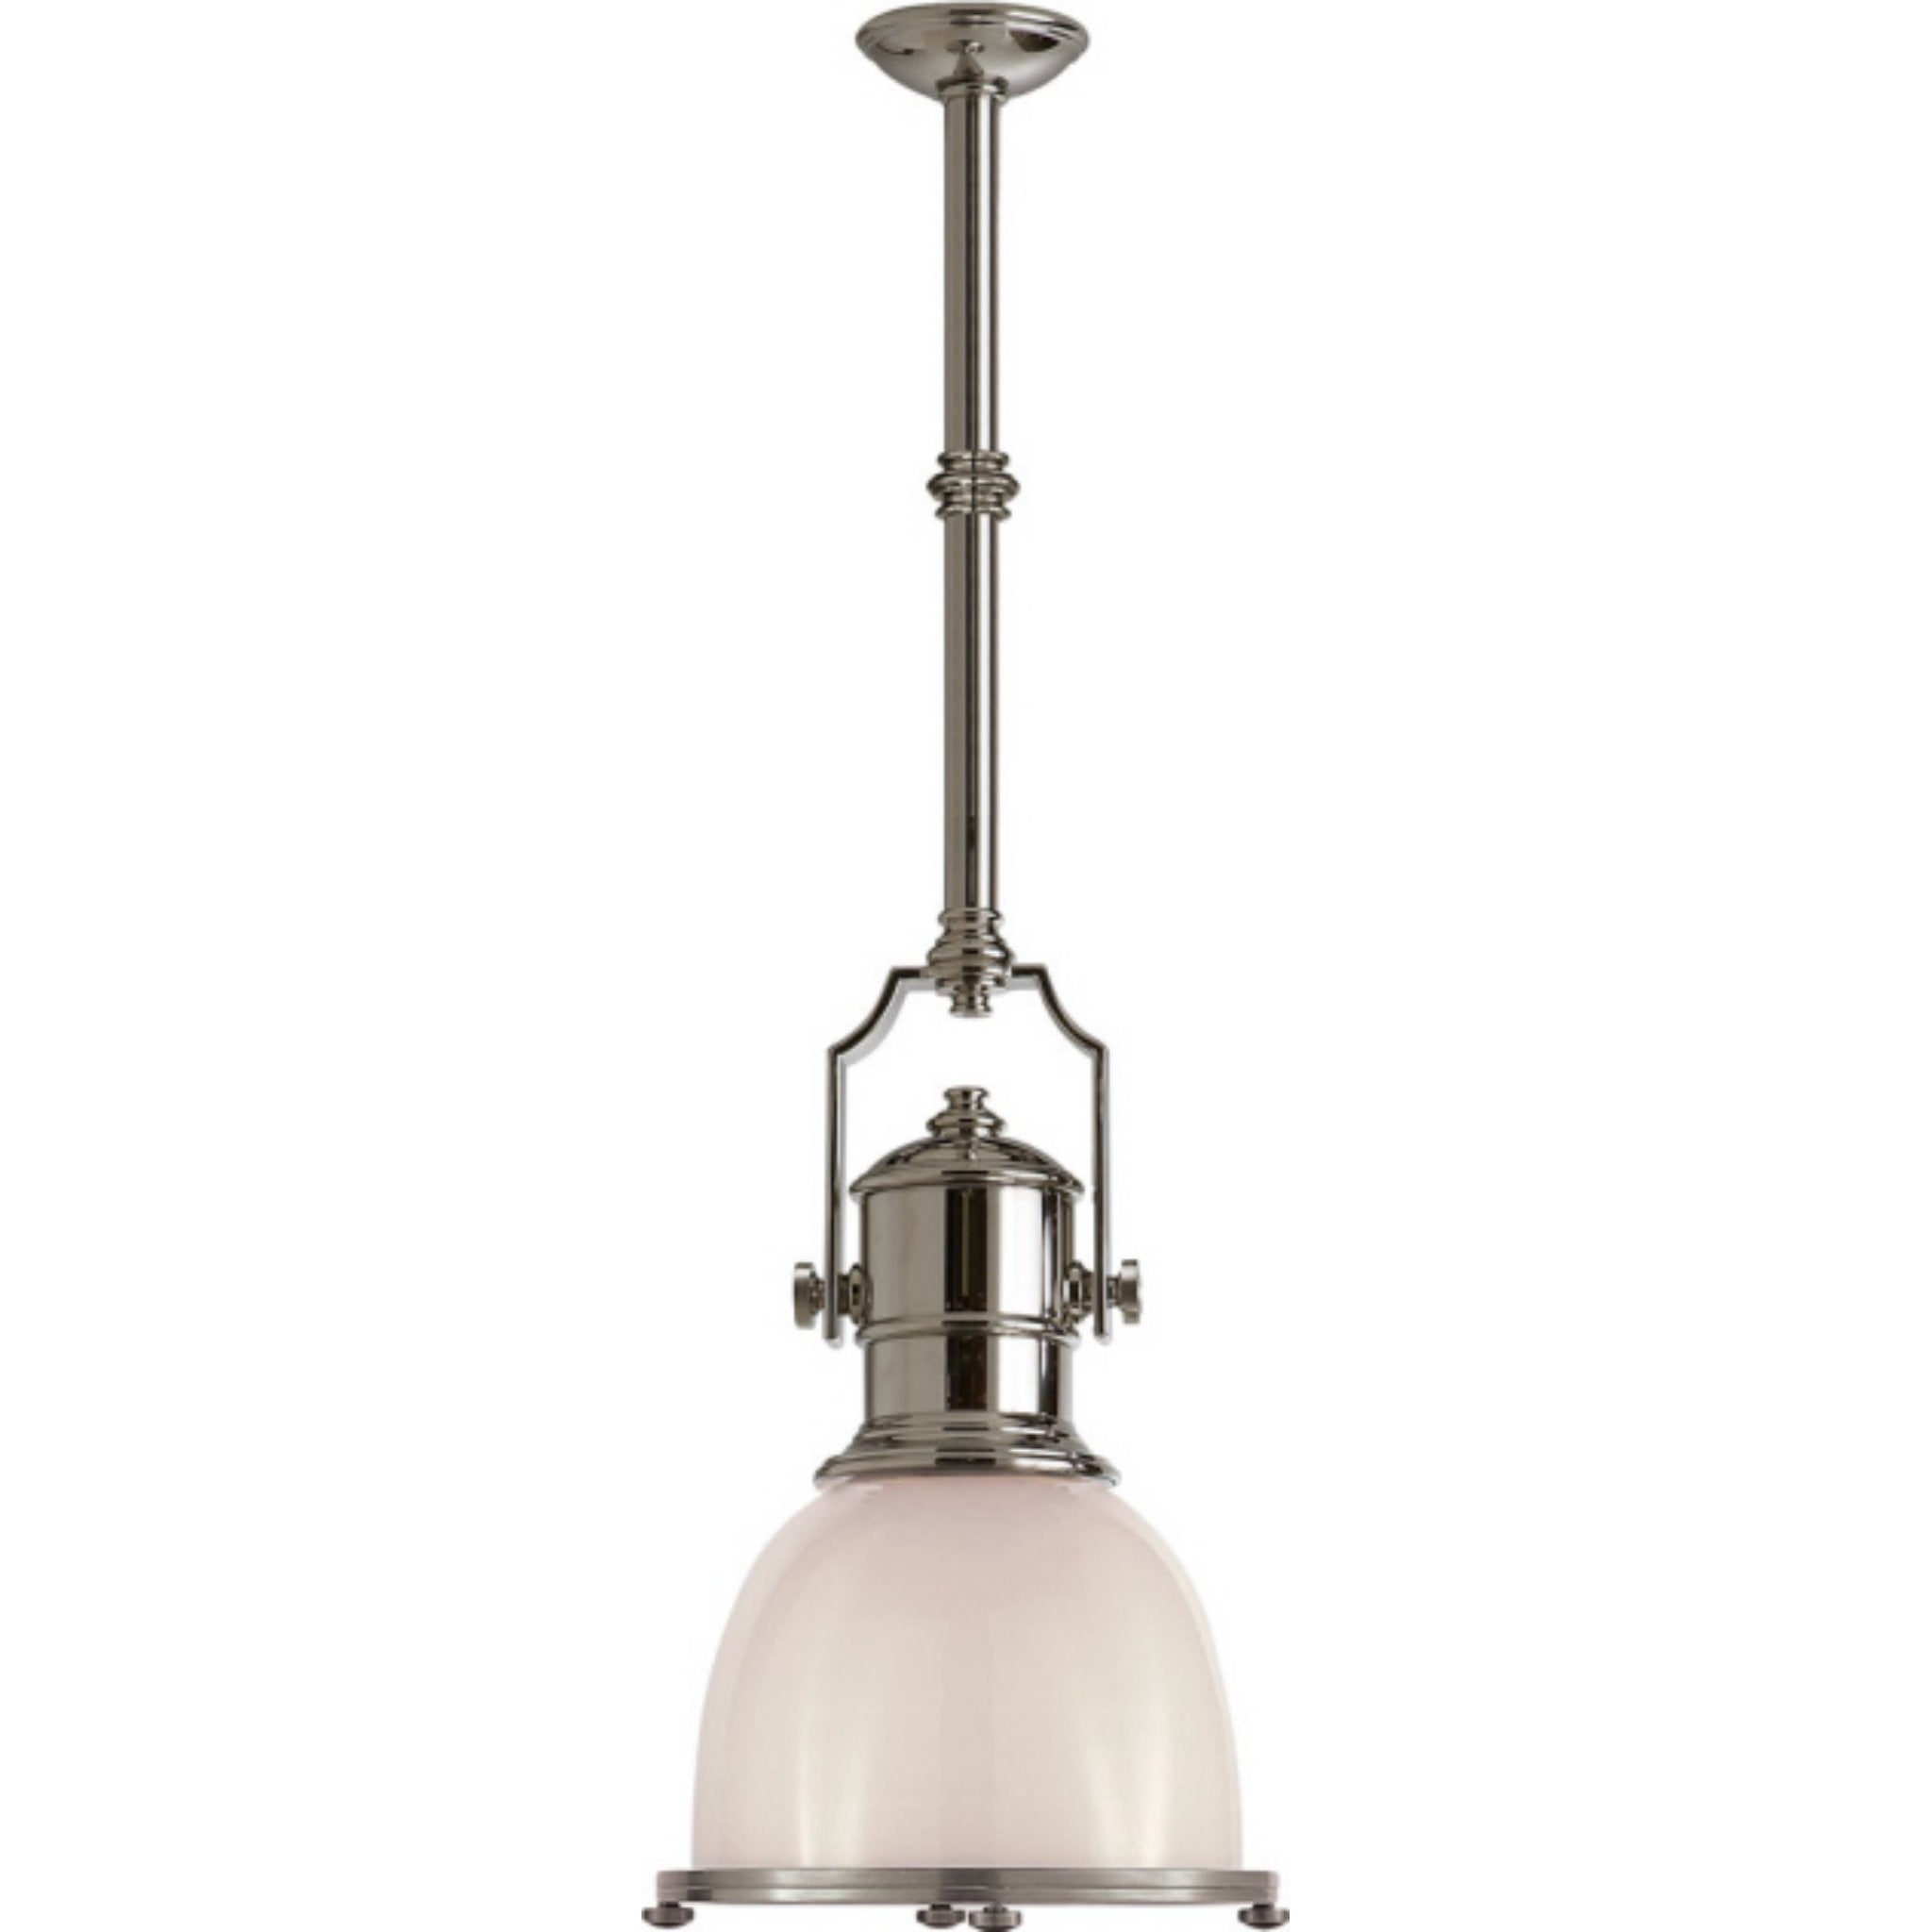 Chapman & Myers Country Industrial Small Pendant in Polished Nickel wi